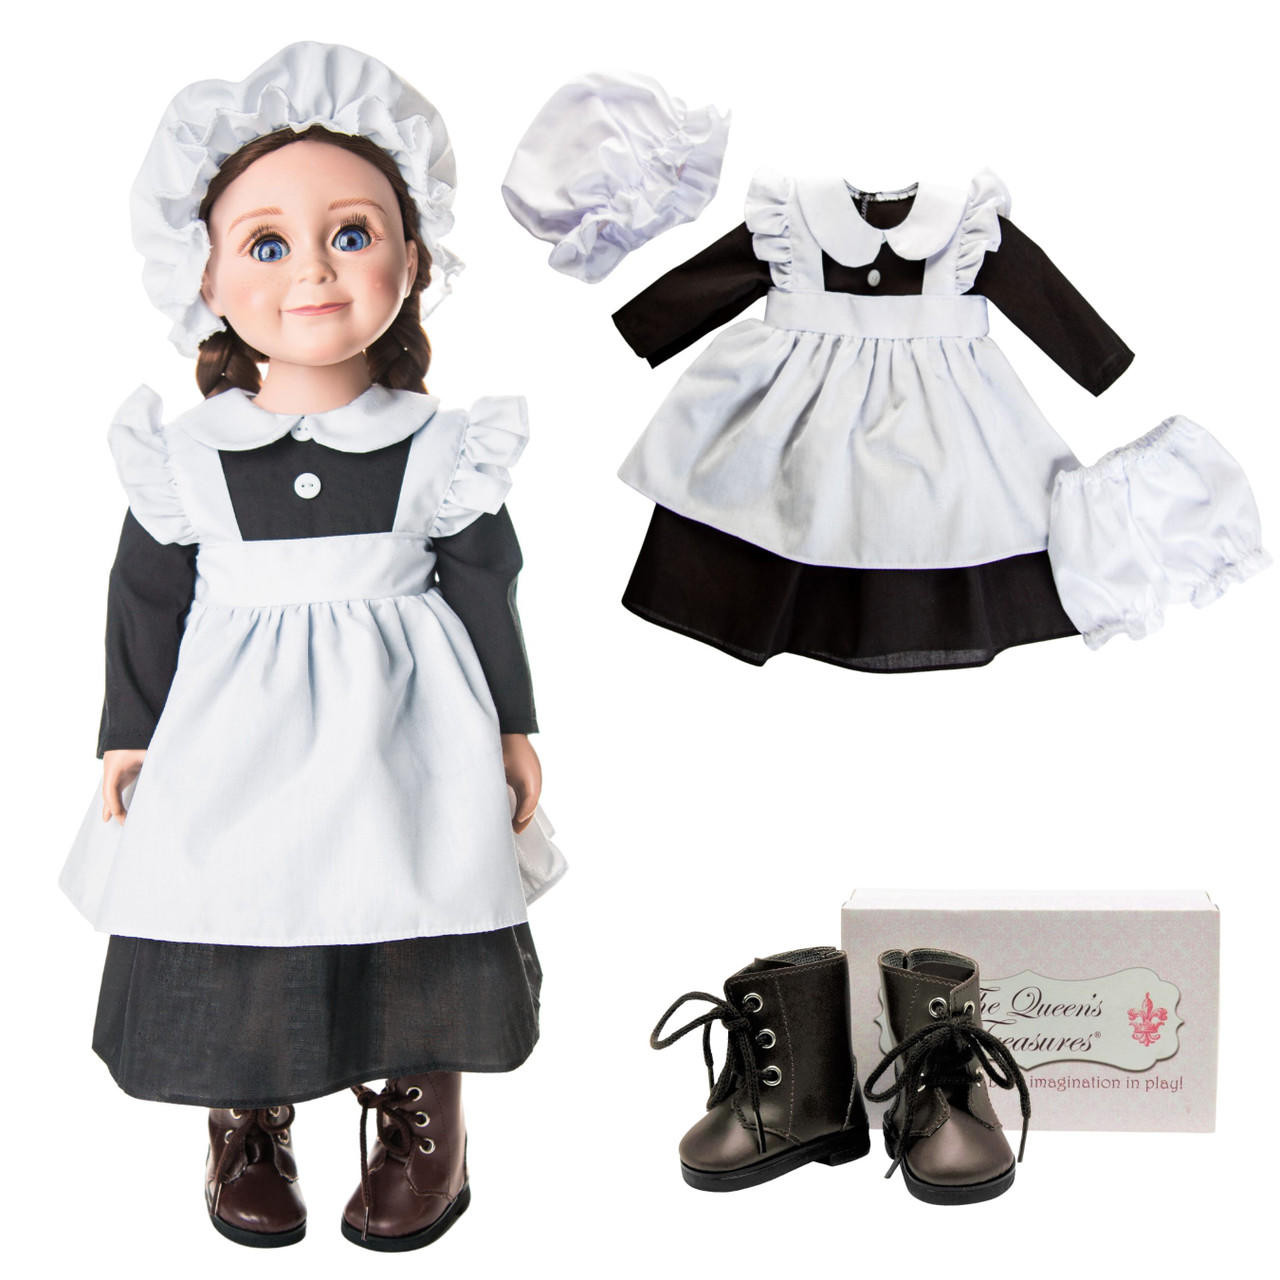 https://cdn11.bigcommerce.com/s-m5vcu70215/images/stencil/1280x1280/products/266/1948/the-queens-treasures-5-piece-kitchen-maid-clothes-outfit-with-boots-for-18-dolls__43692.1692302722.jpg?c=1